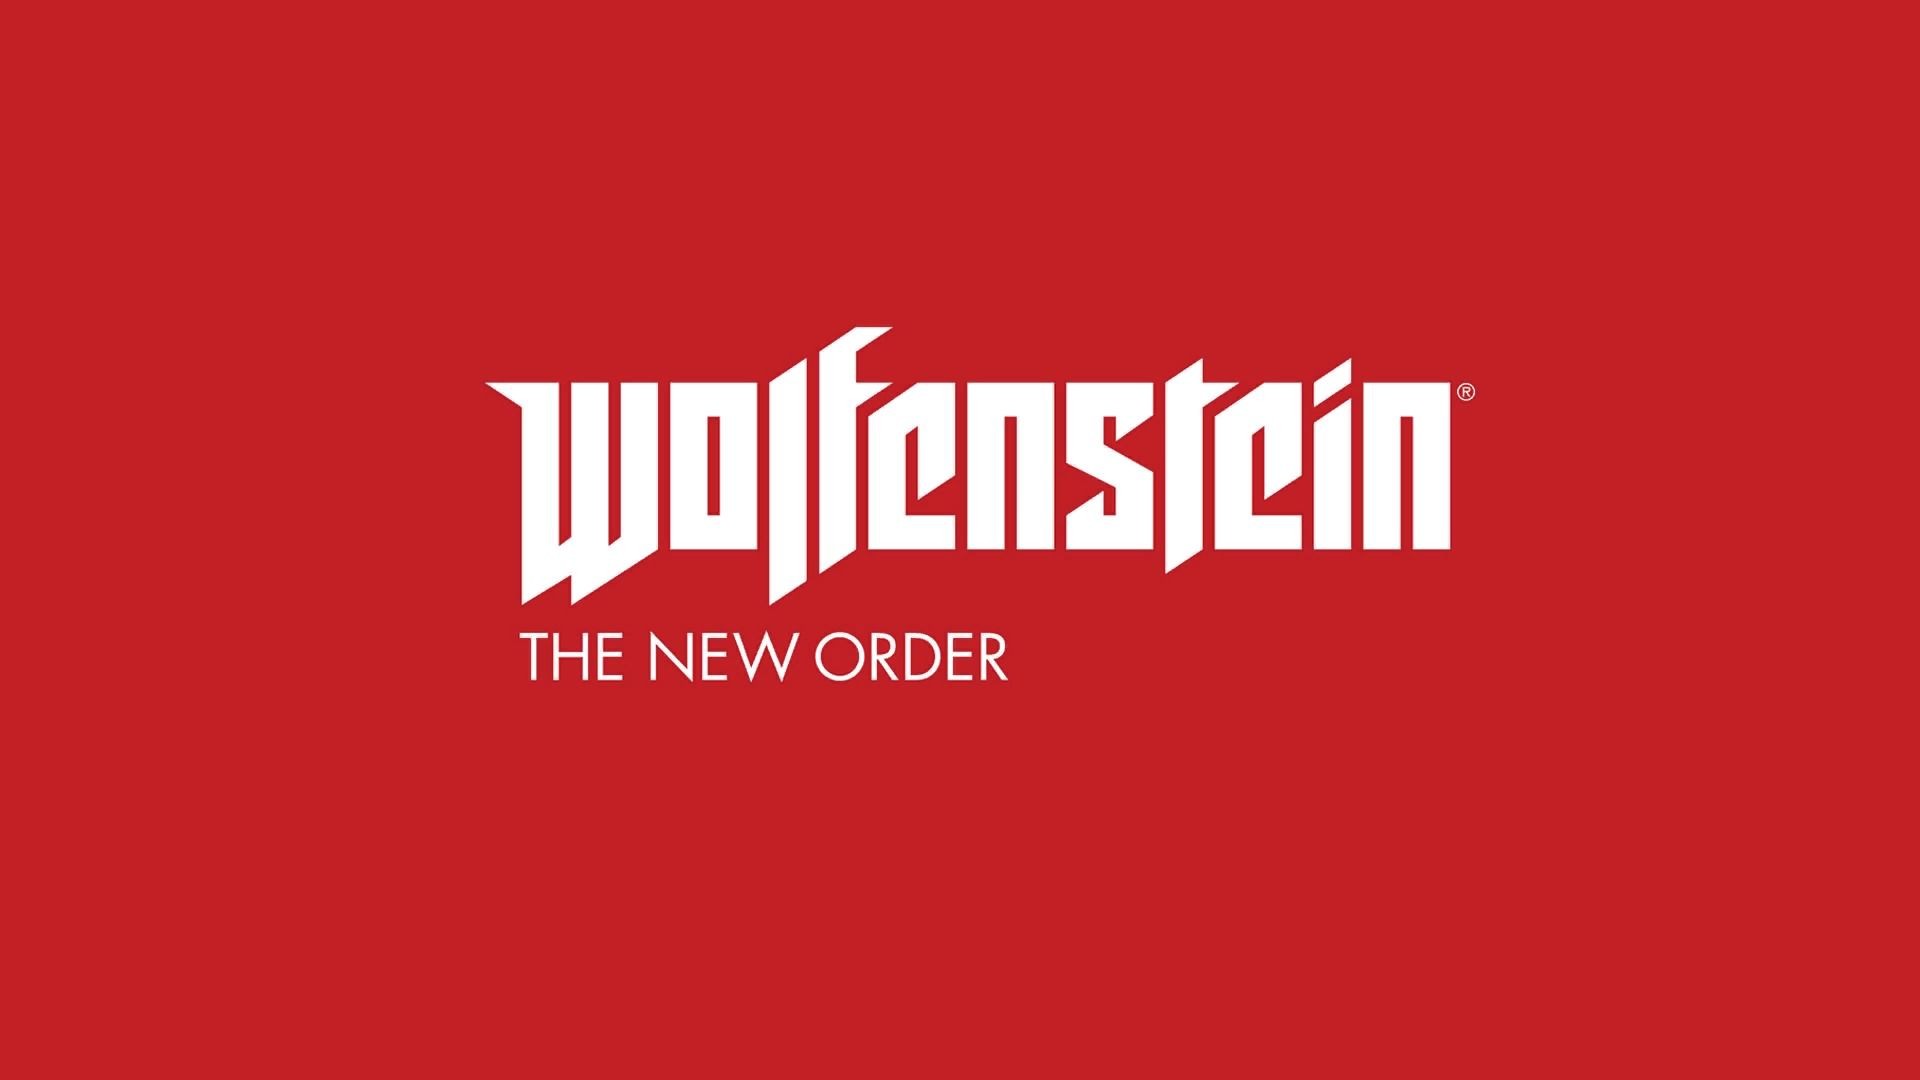 We have new order